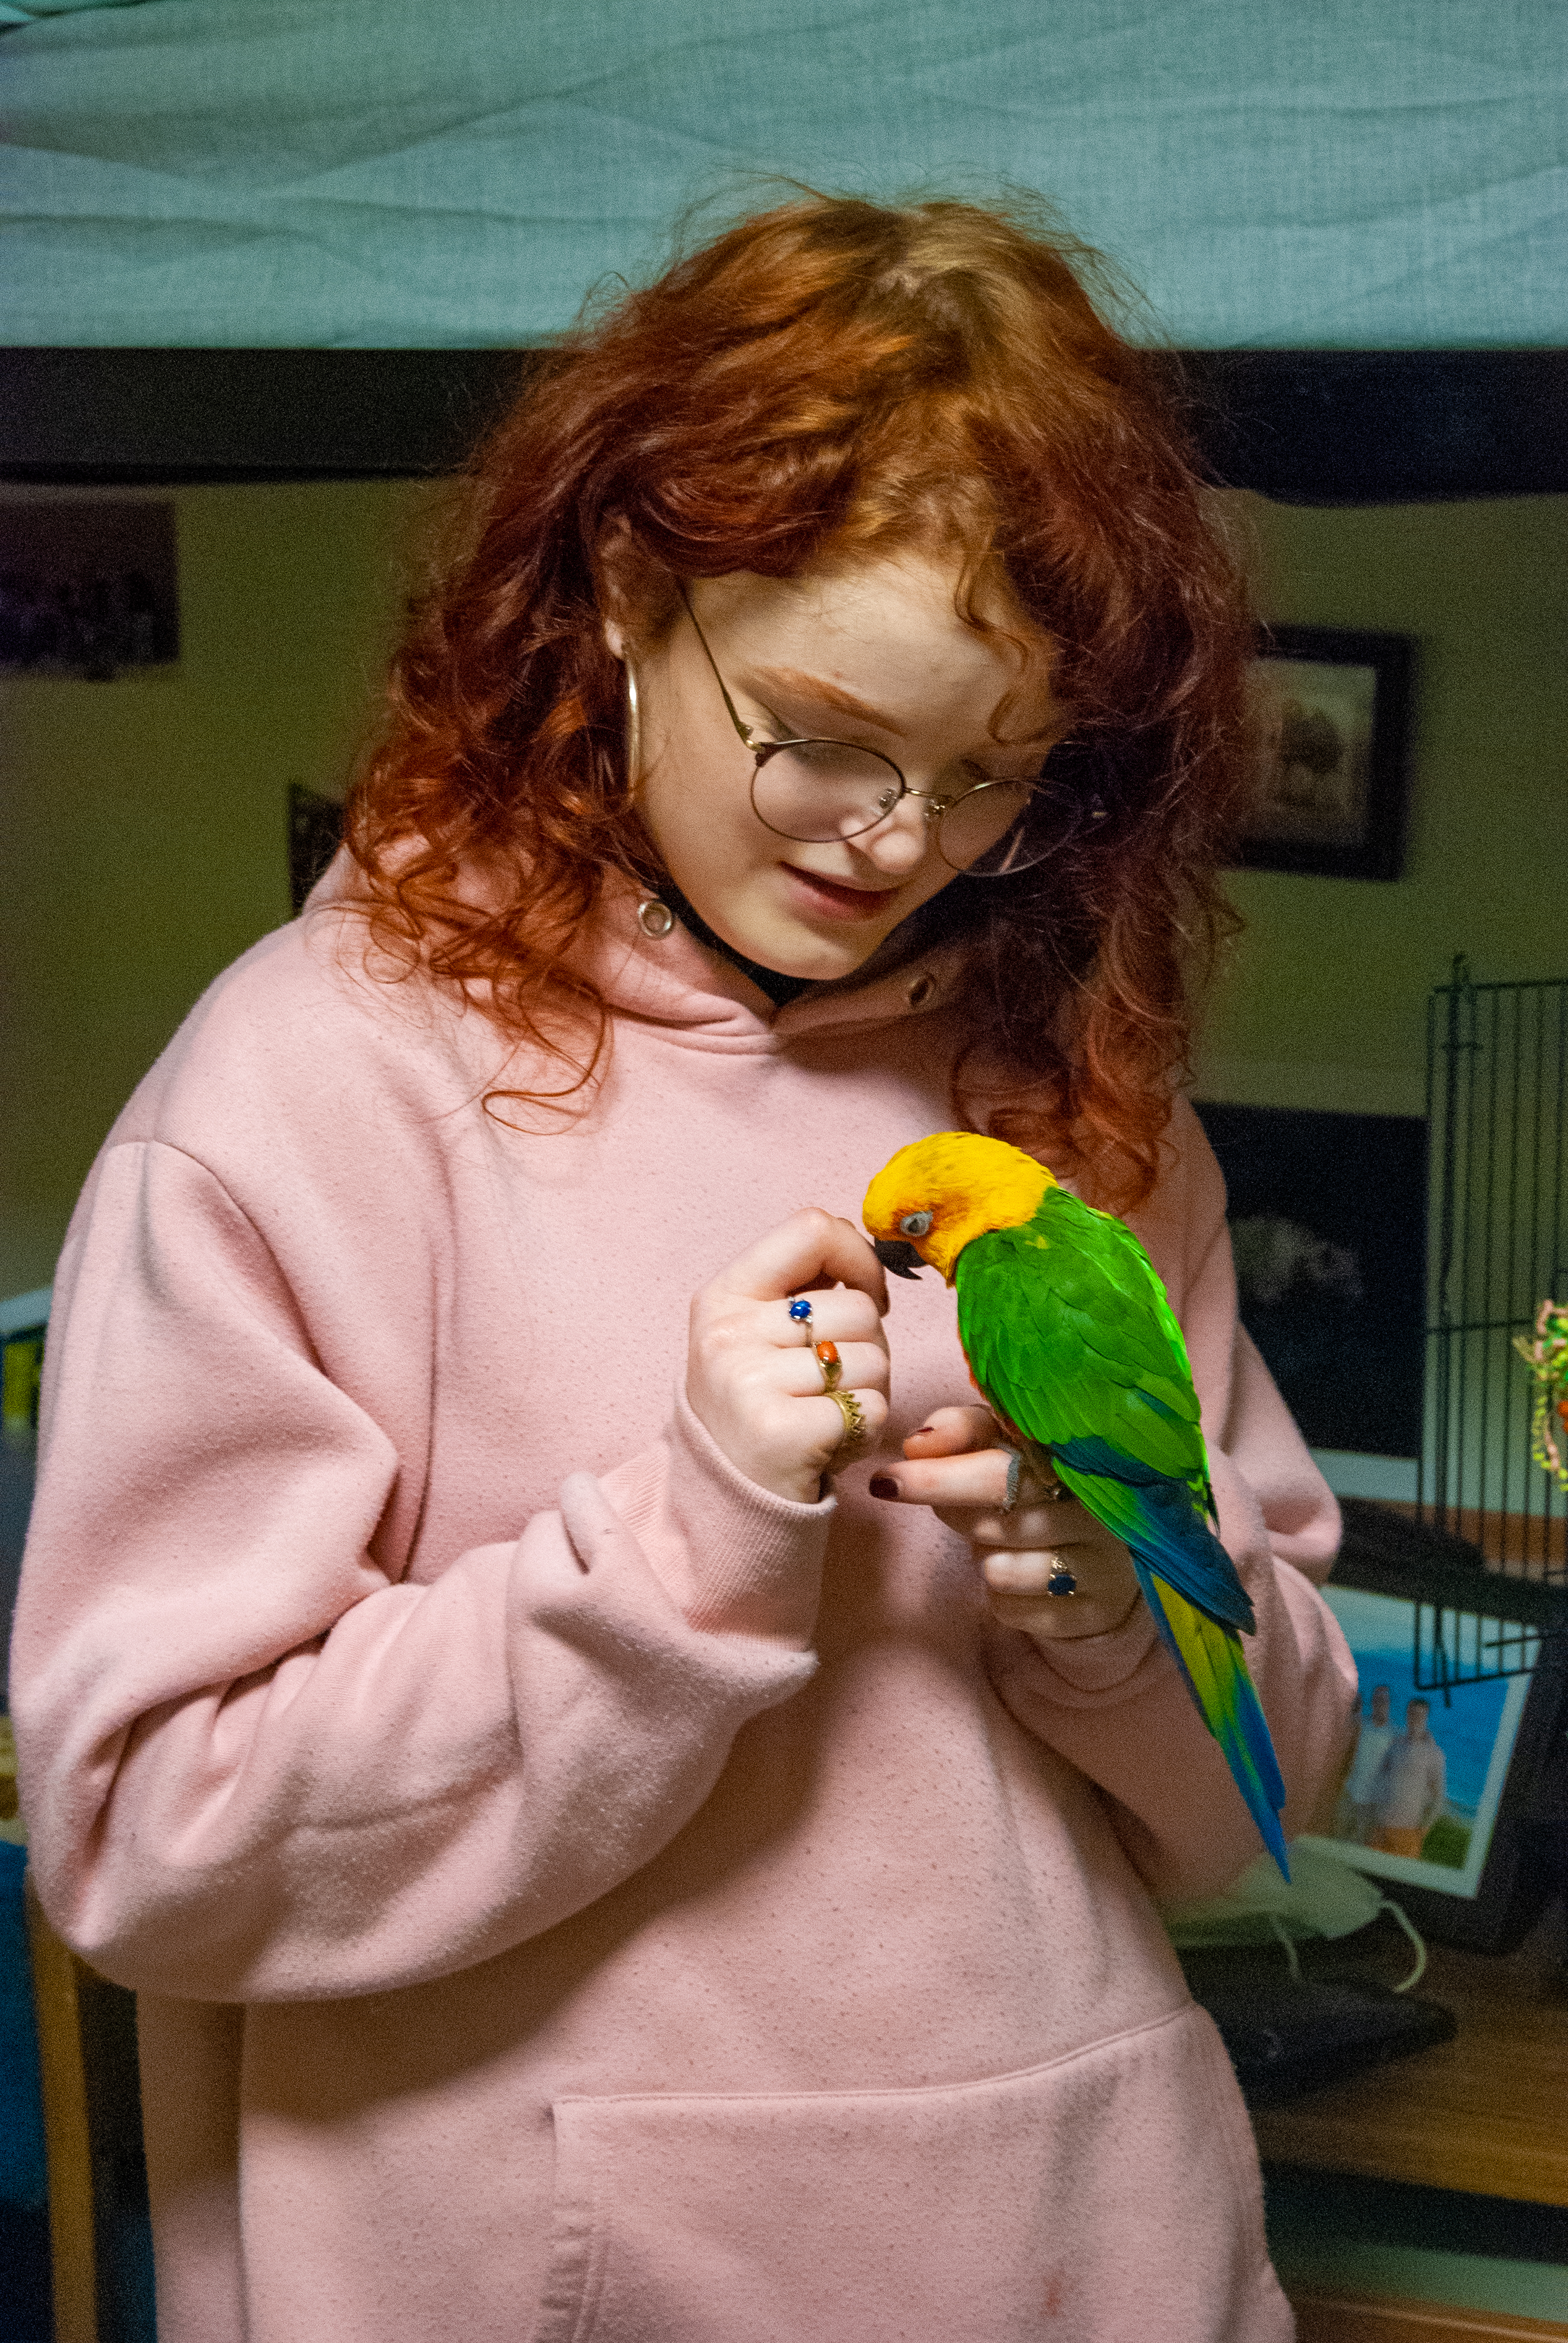 While holding Ollie on her finger, Wade cranes her neck down as Ollie nestles close to her chest.